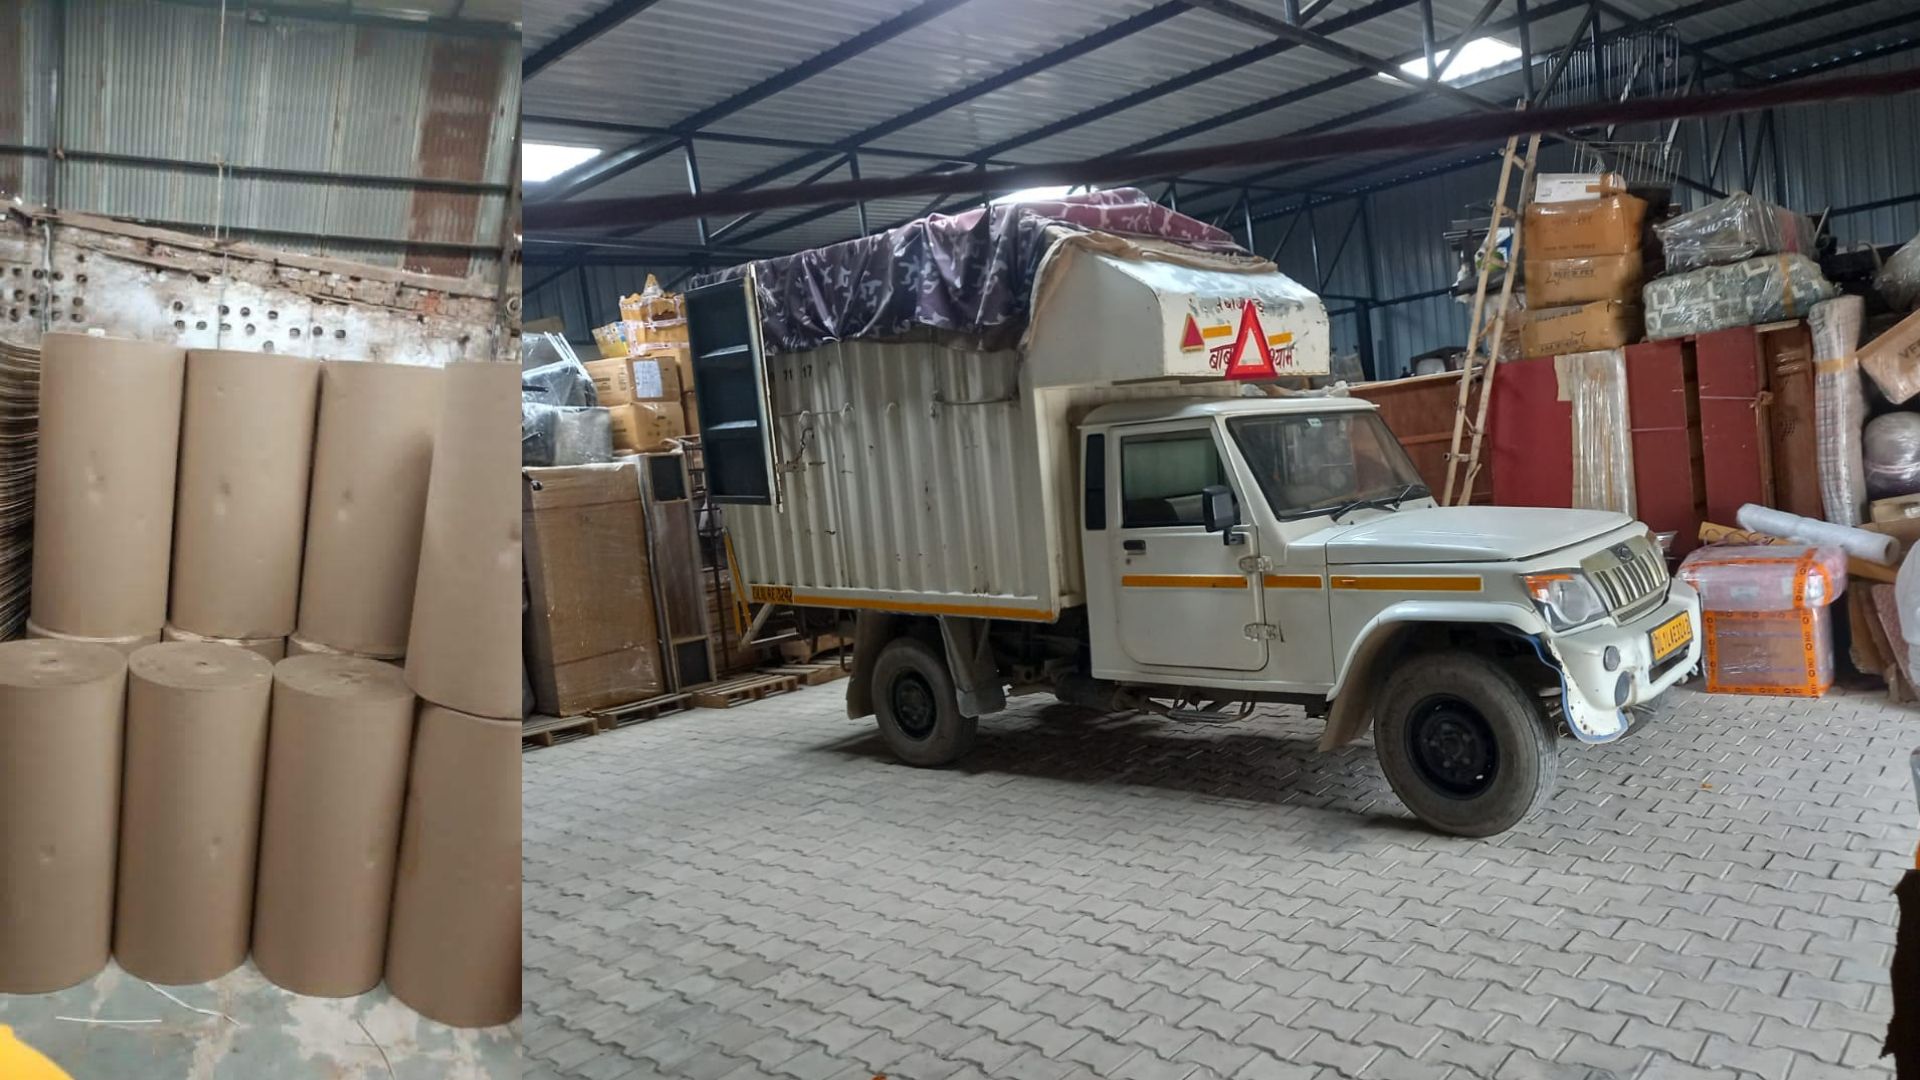 Hire professional packers and movers in Gurgaon for recommendations from family and friends